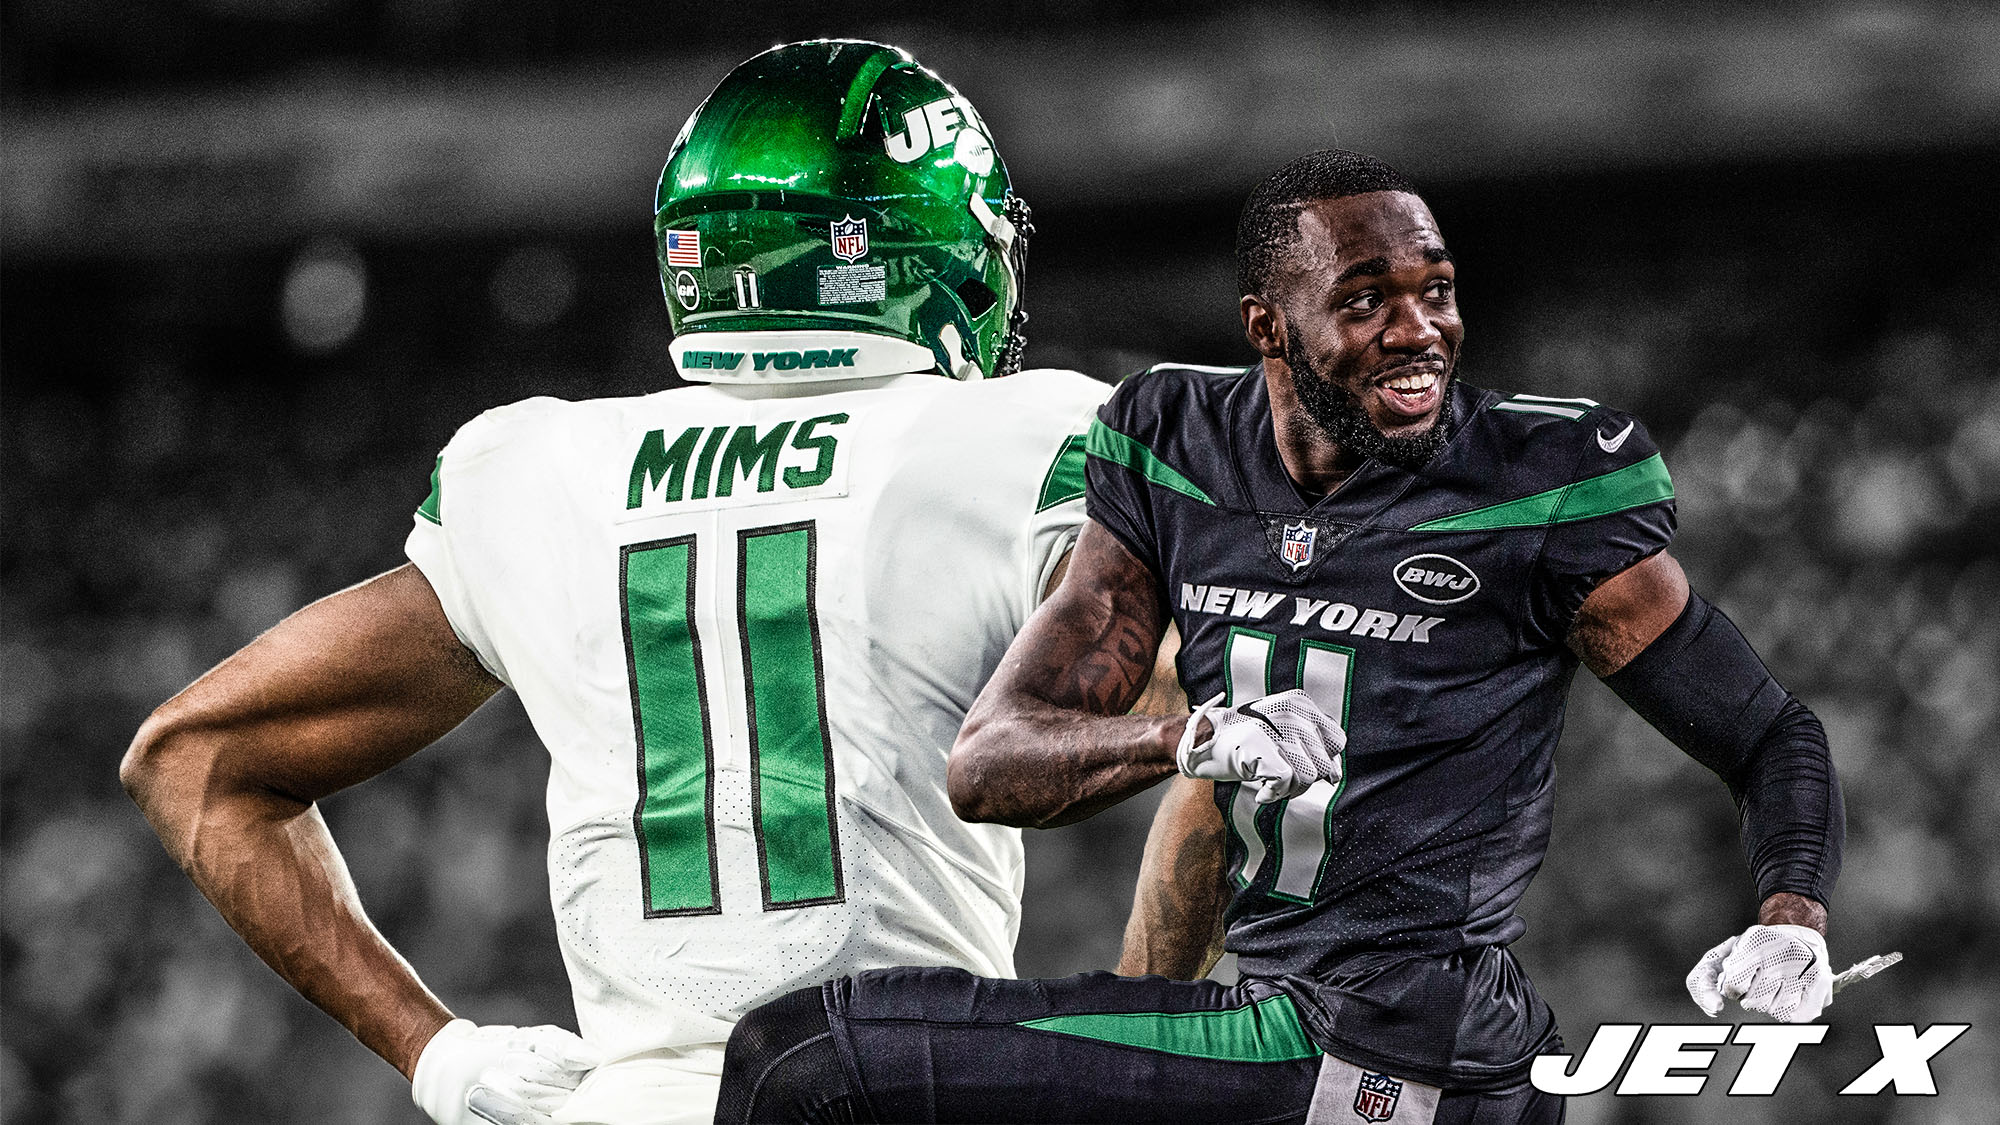 The Denzel Mims situation calls for proper NY Jets fan perspective